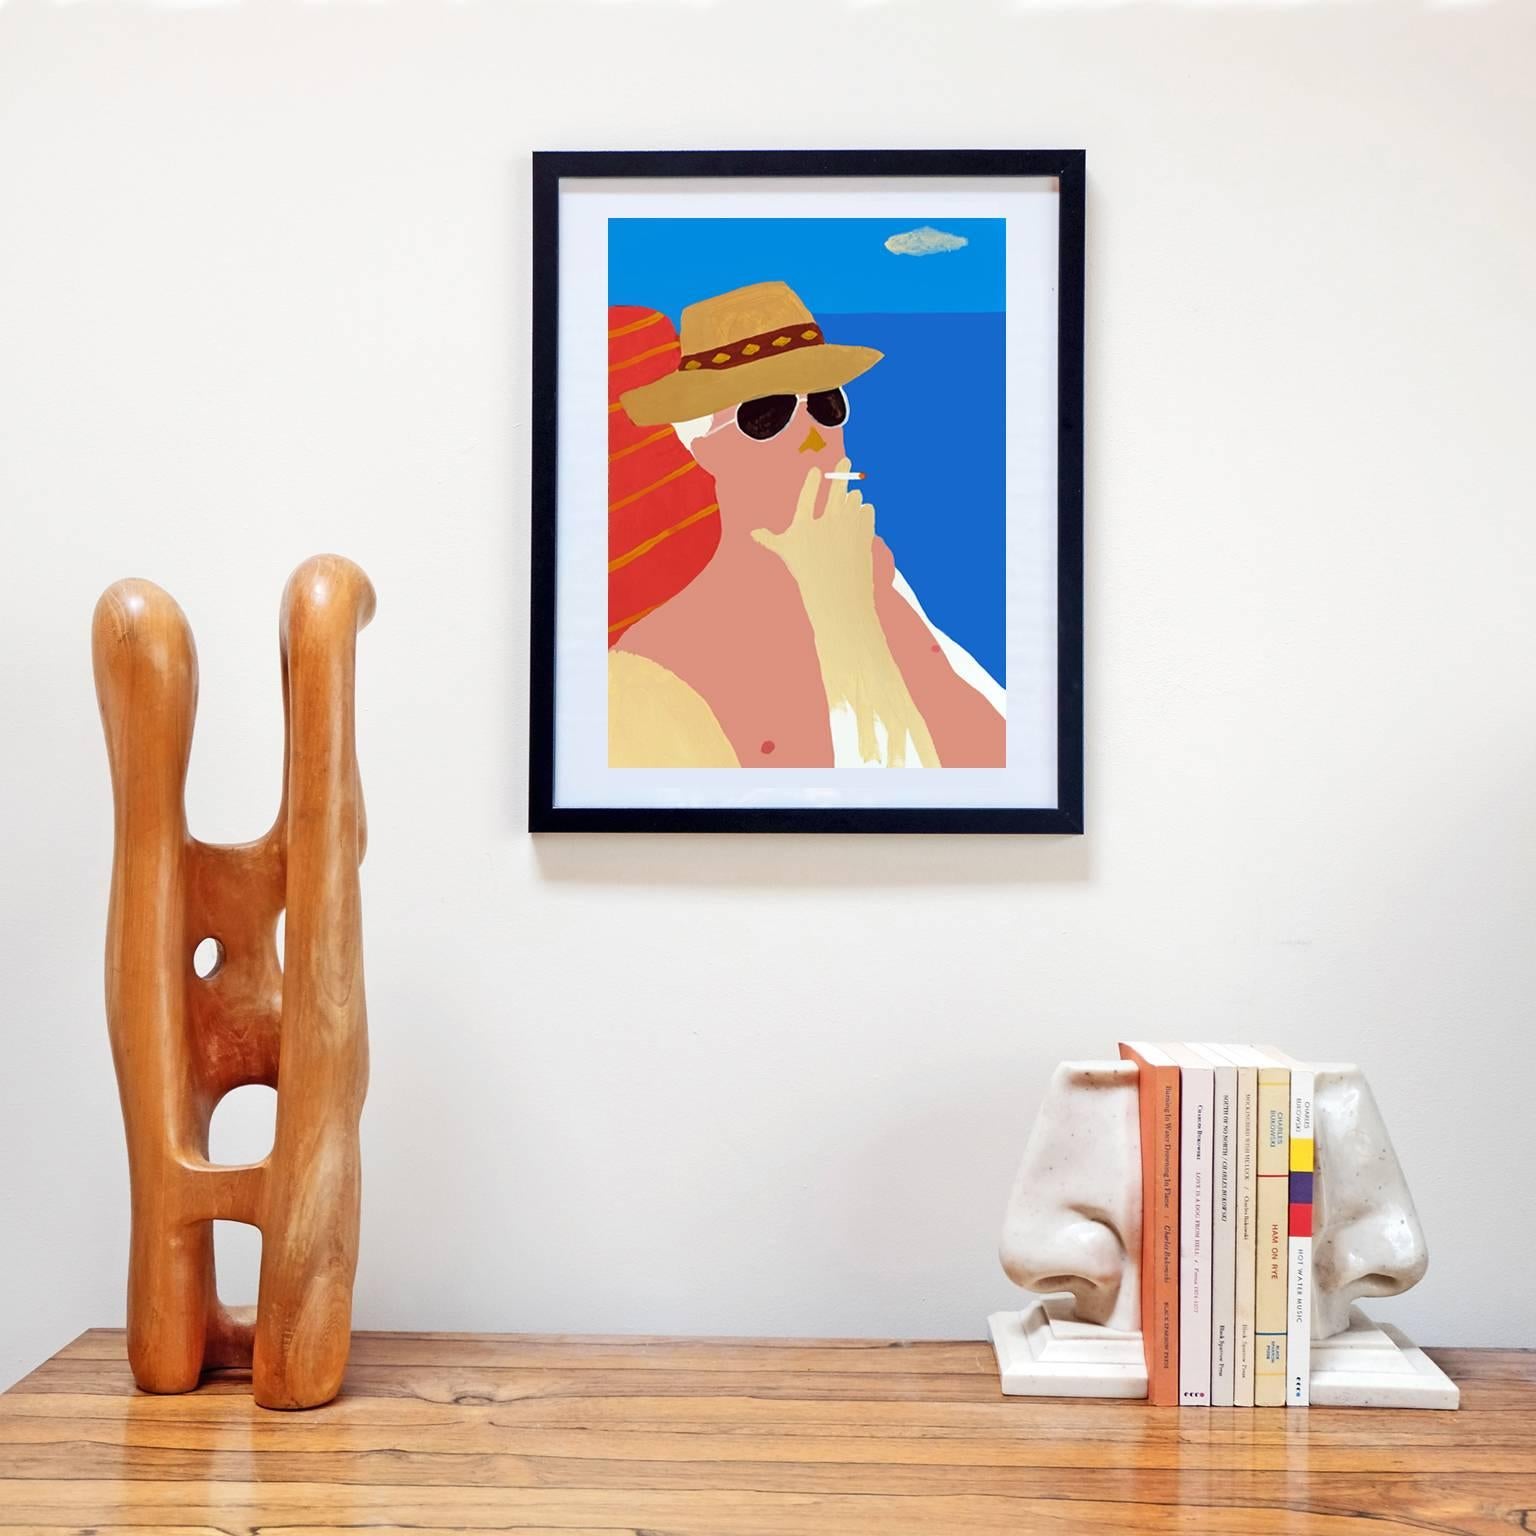 Acrylic on 300gsm paper by Alan Fears, 2018. 

Unframed. The frame is for display purposes only.

Alan Fears (b. 1974) is an emerging British artist who is shortlisted for the John Moore's Painting Prize 2018.

'A naive artist, a graphic